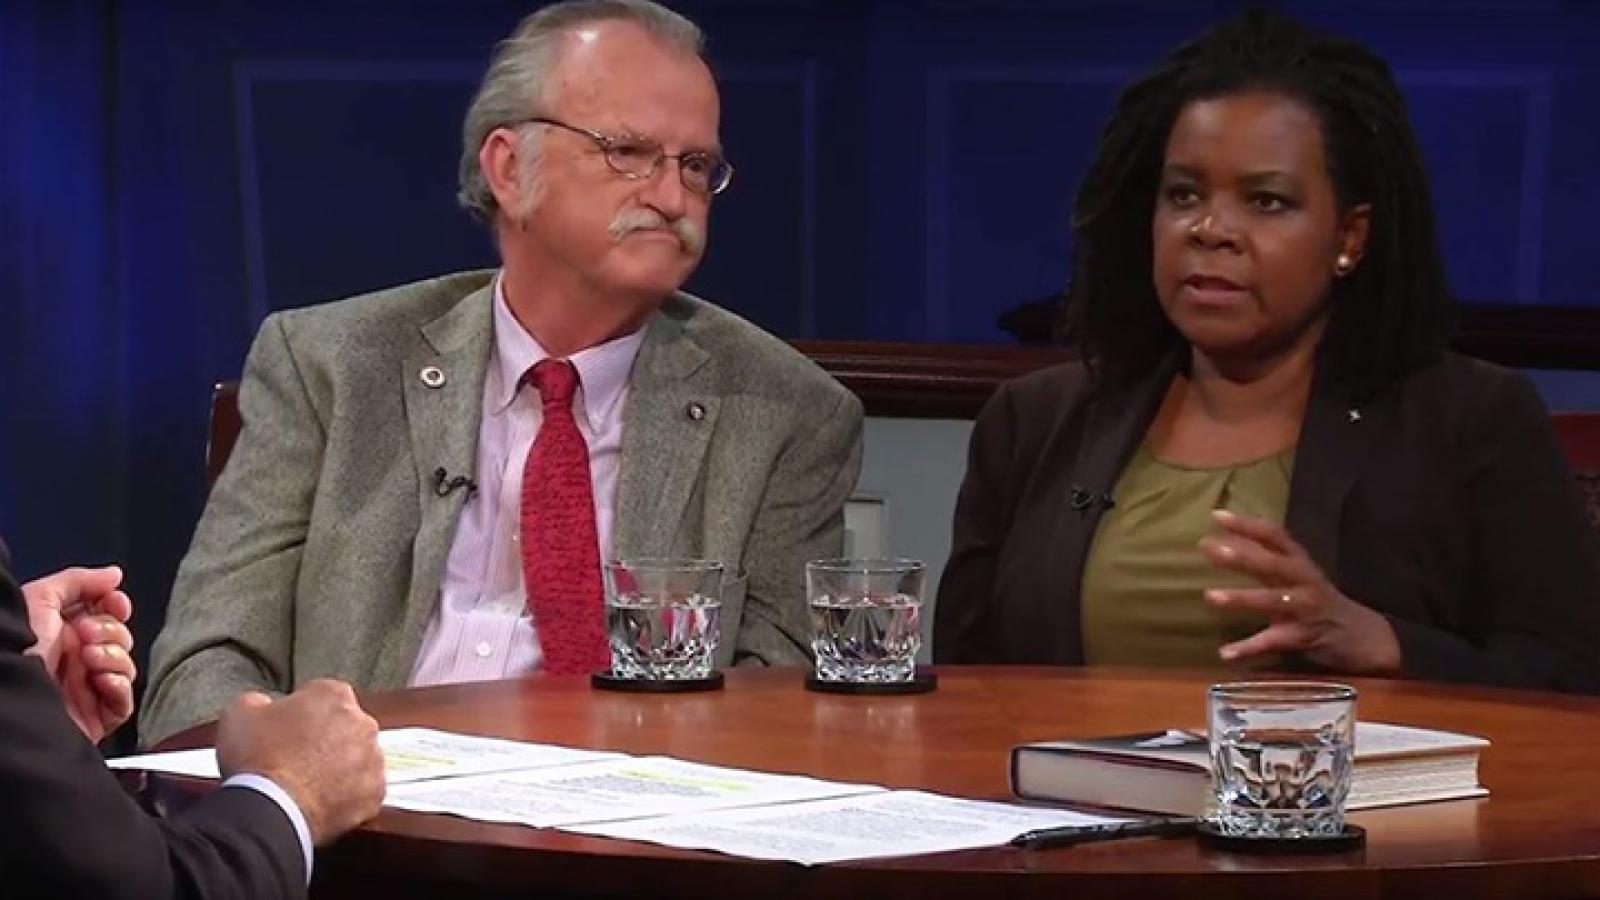 Annette Gordon-Reed and Peter Onuf discuss Thomas Jefferson's view of slavery